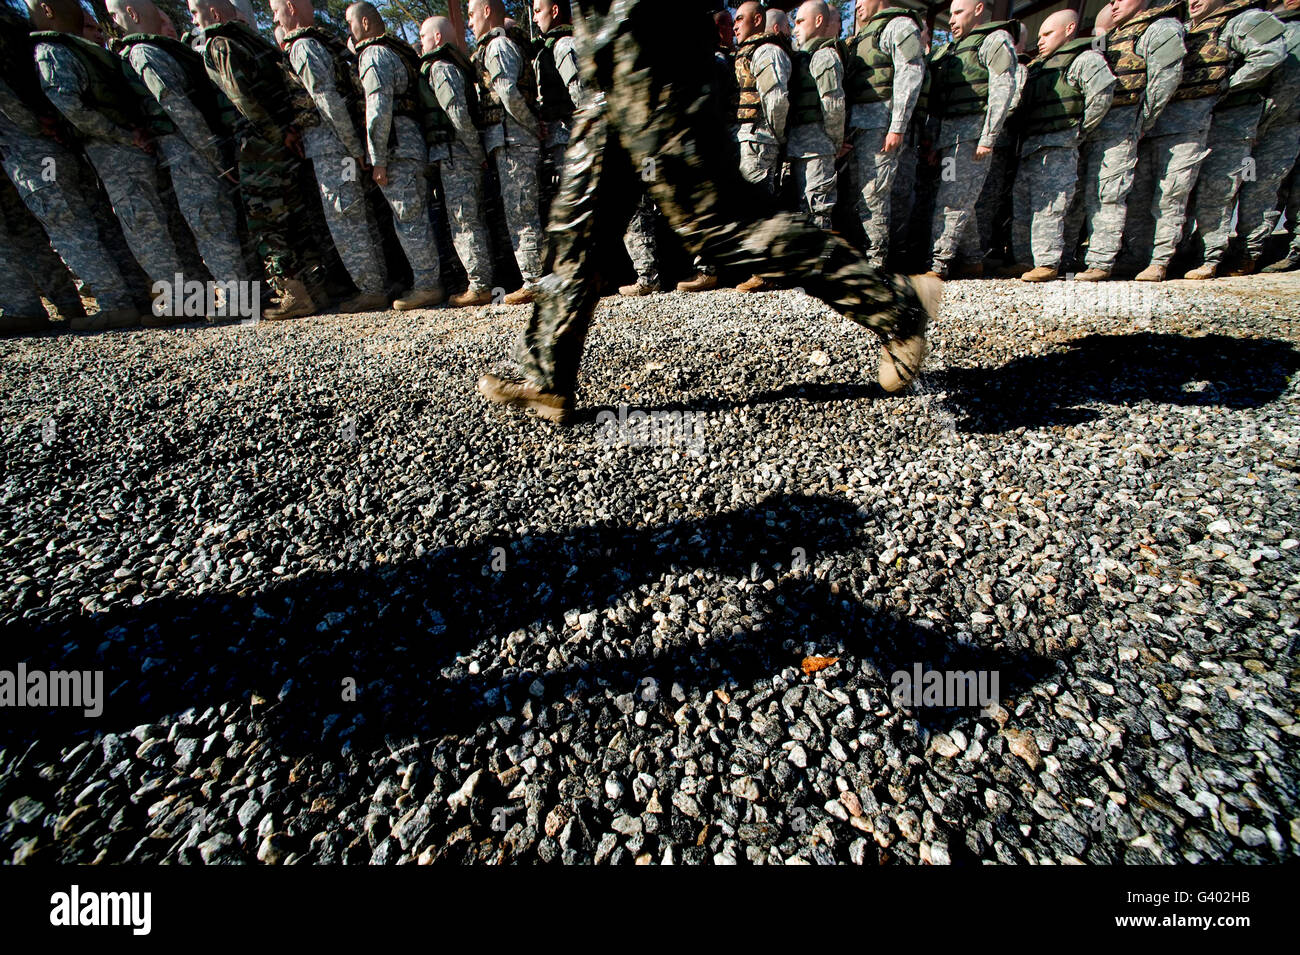 A U.S. Army Ranger School instructor shouts commands to soldiers. Stock Photo